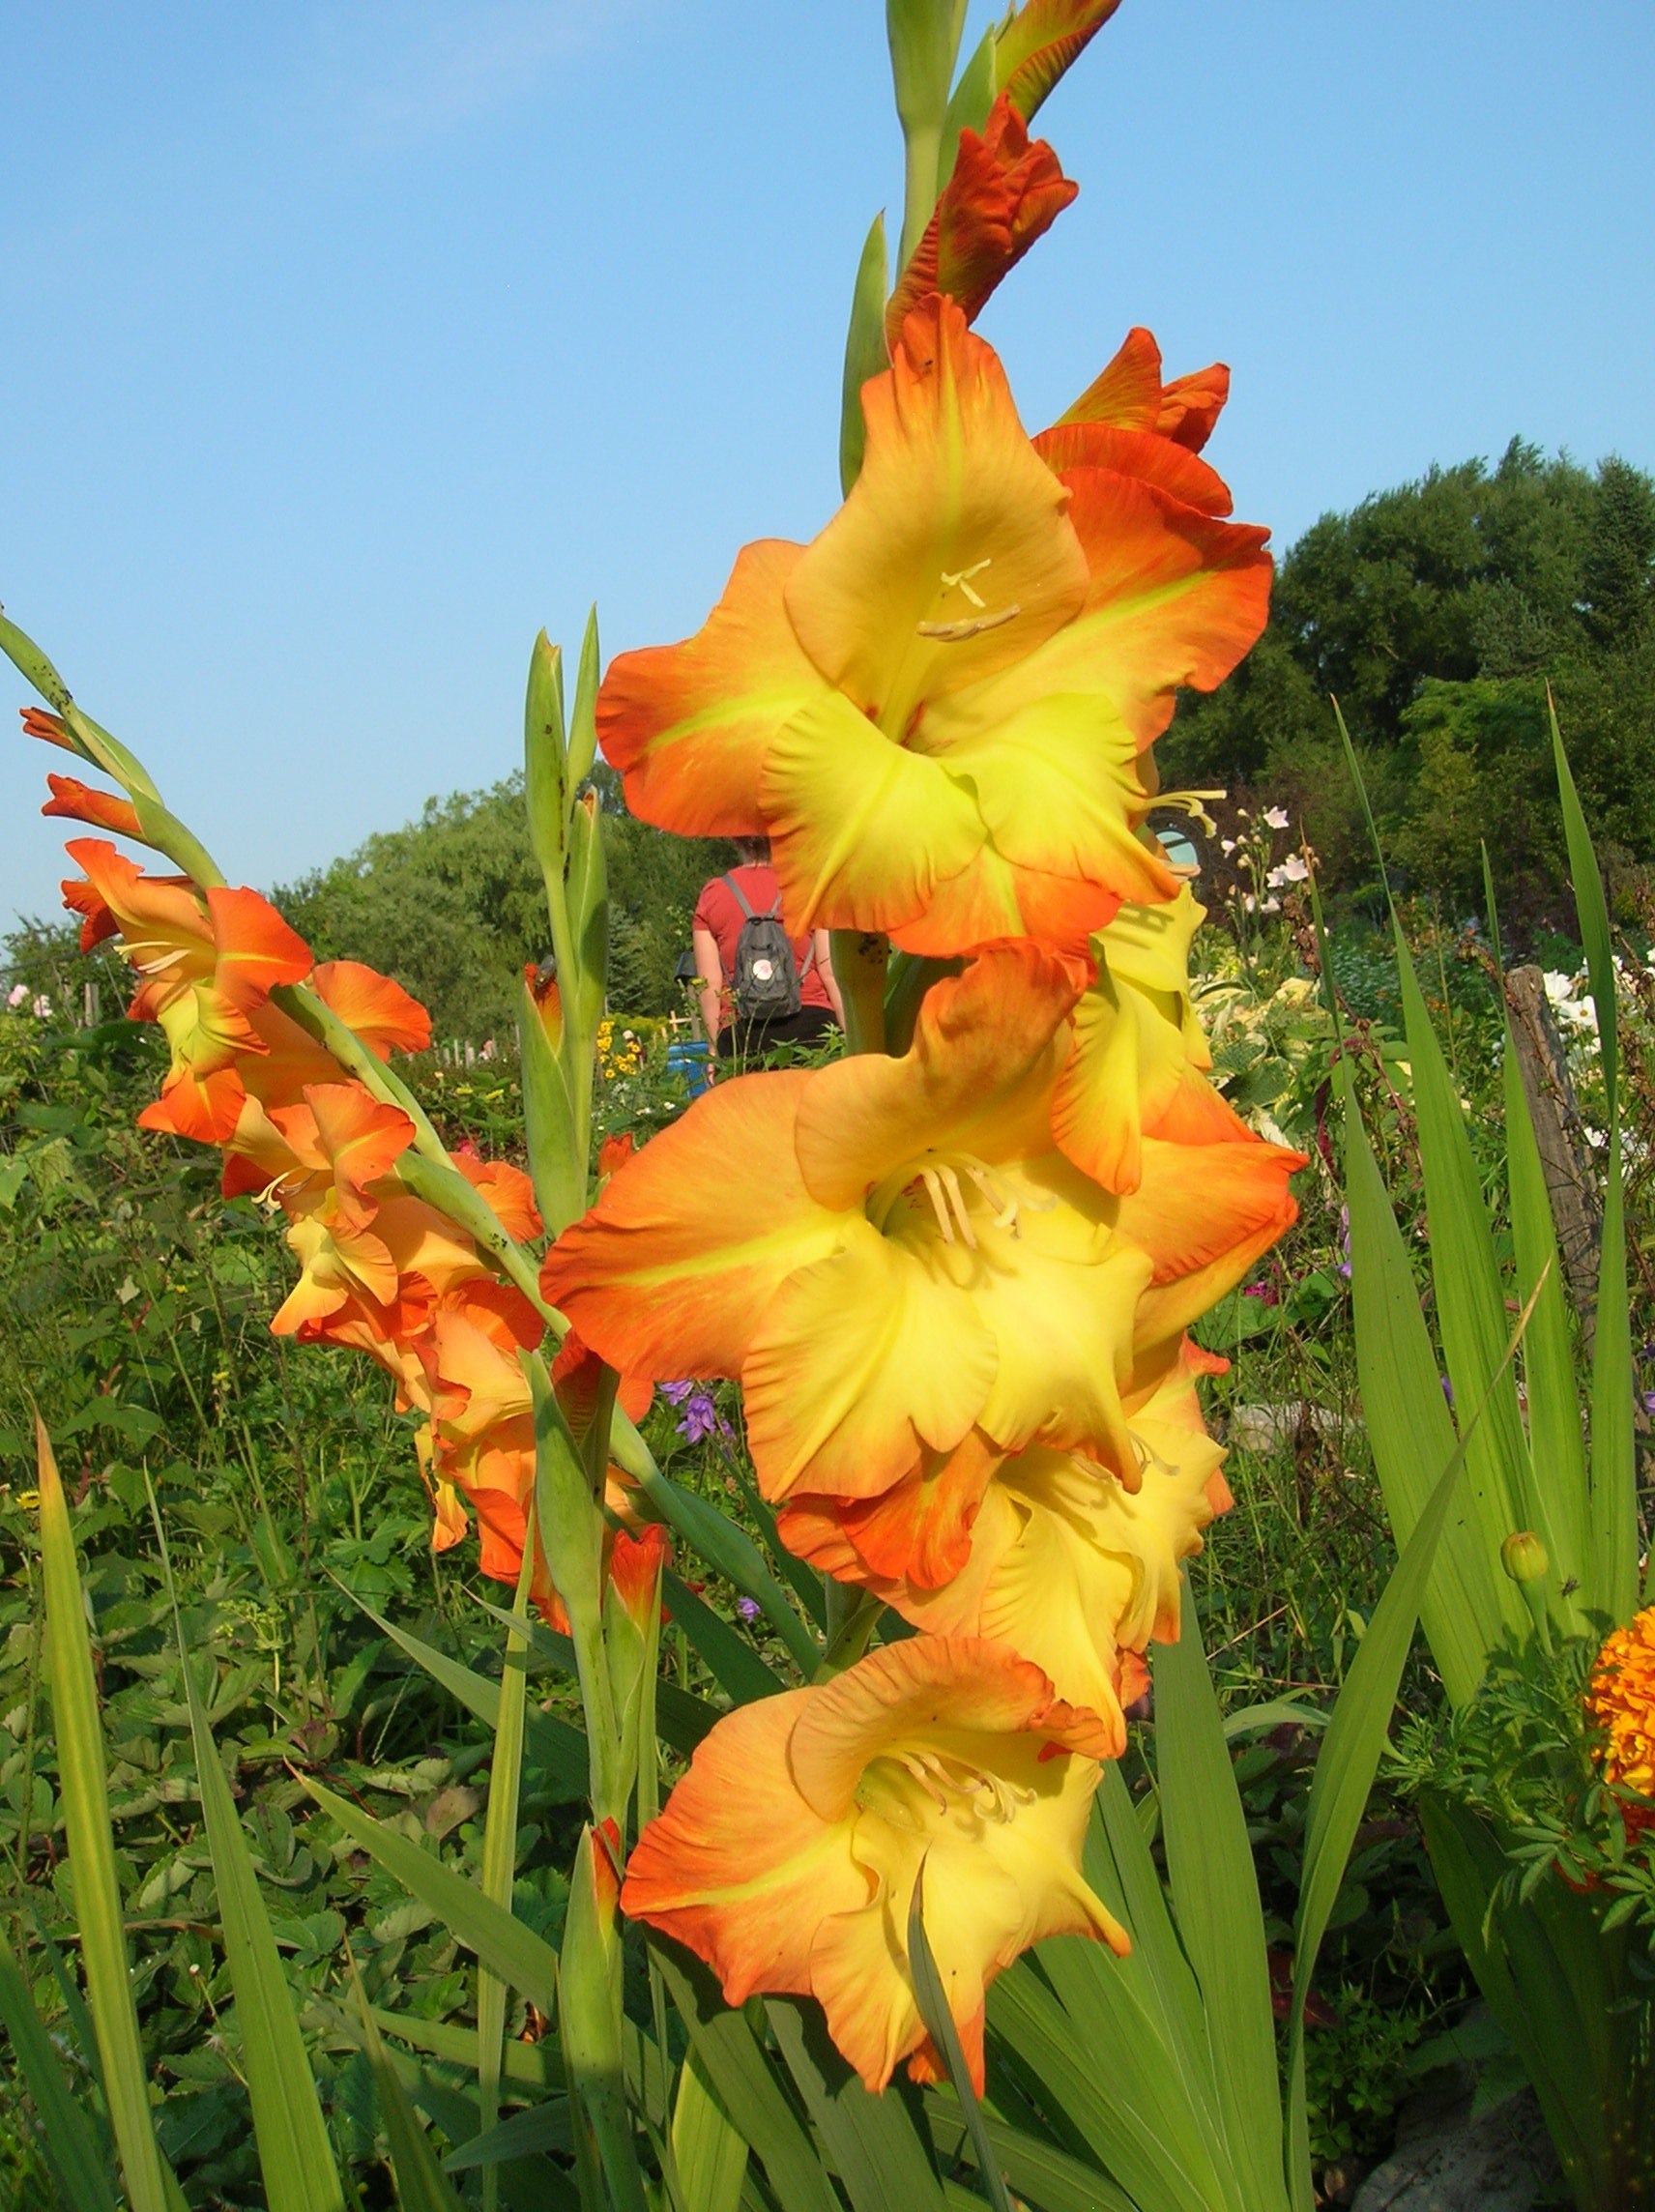 How to Grow: Gladiolus-Growing and Caring for Gladiolus